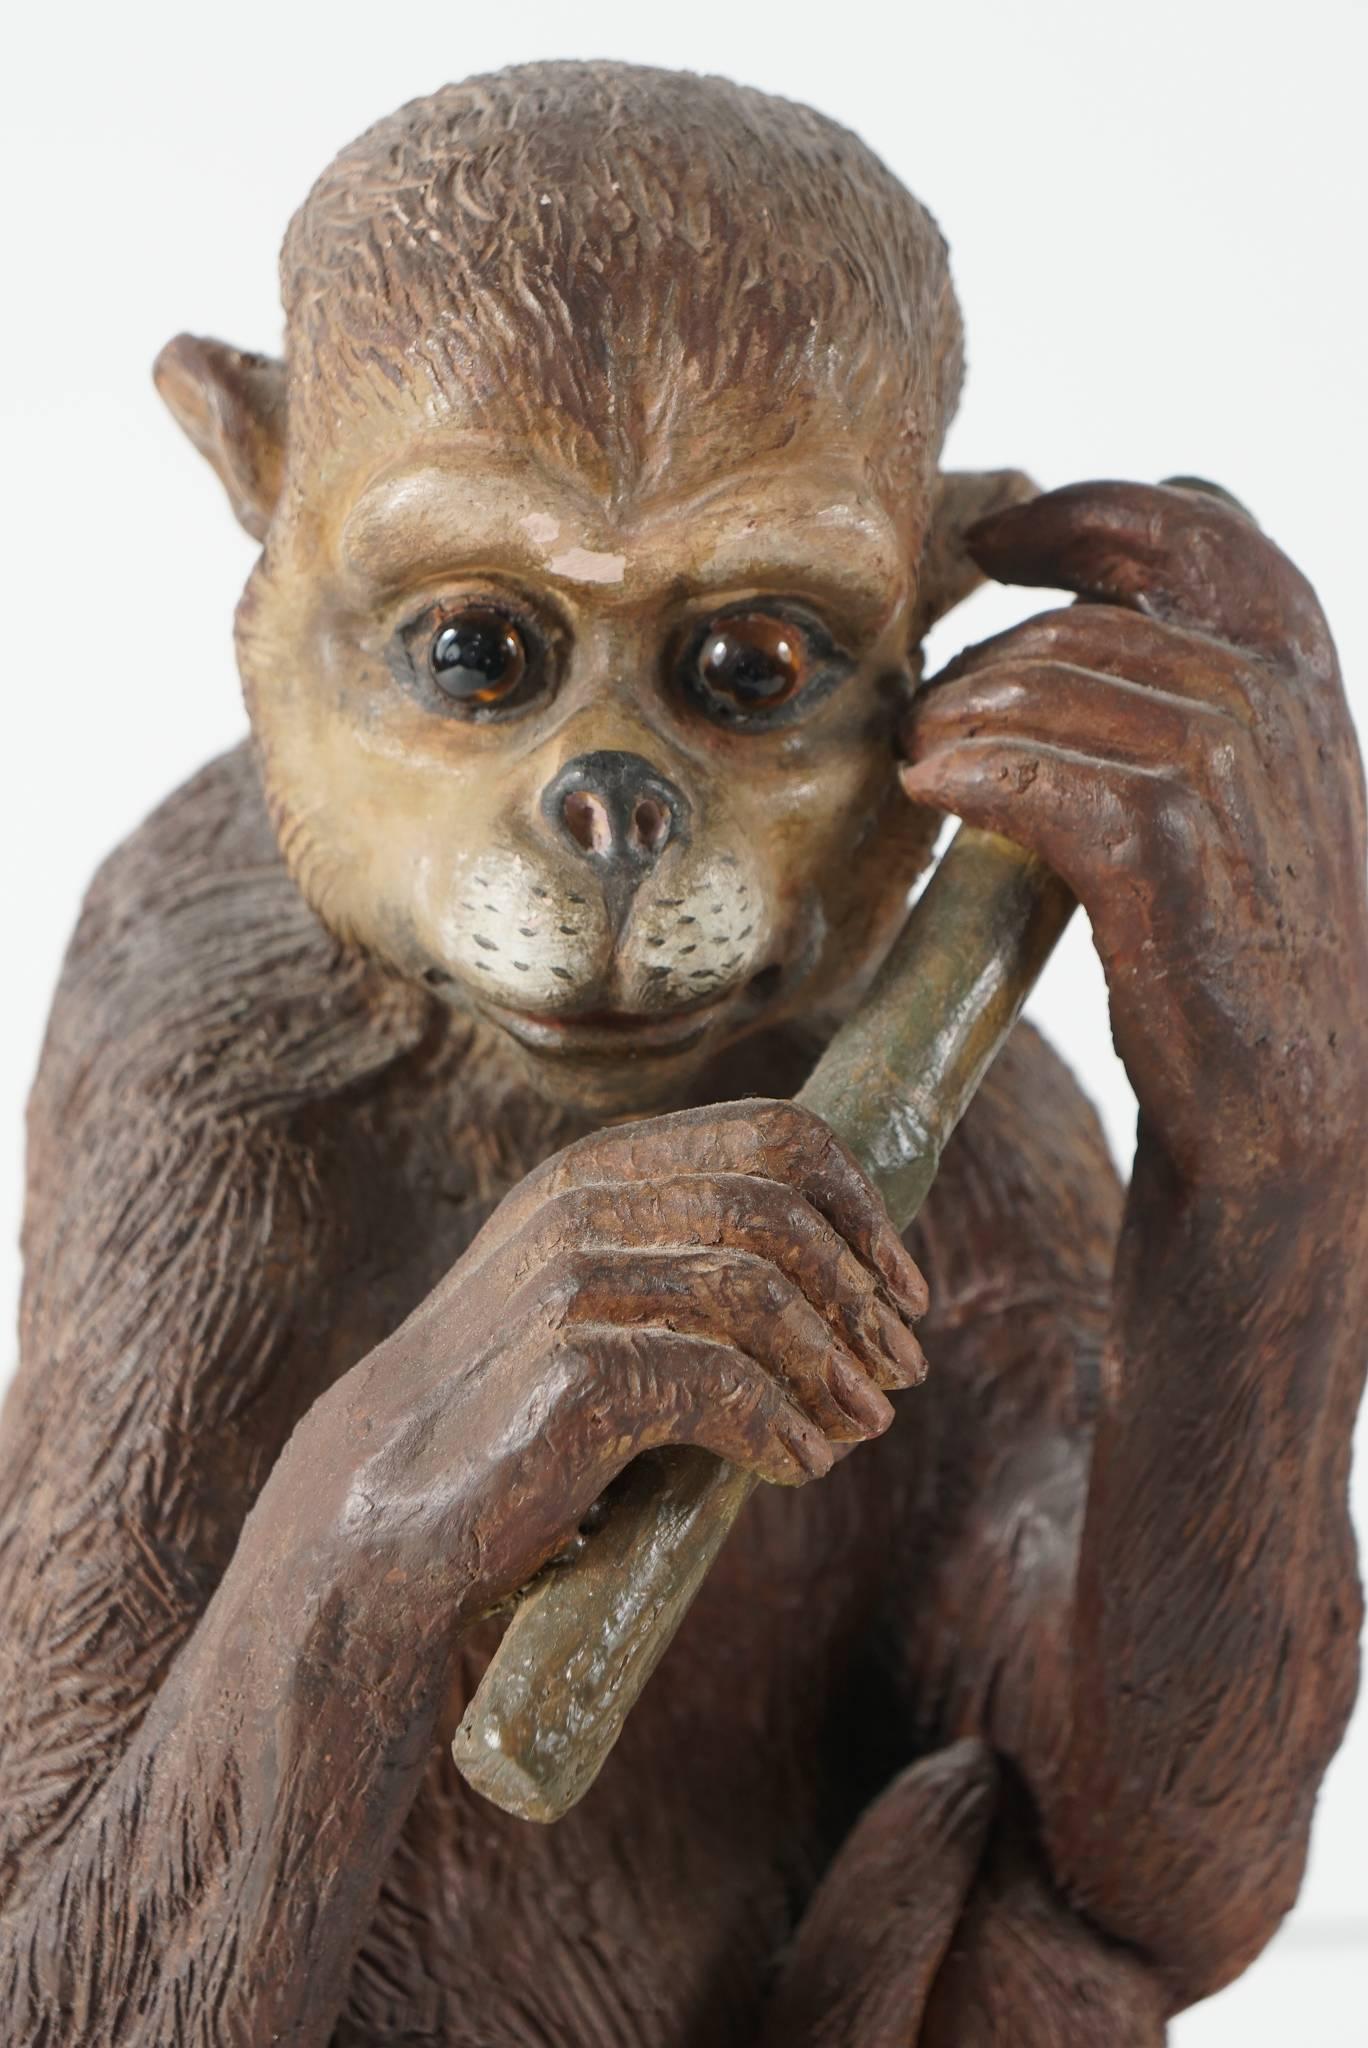 This fun and whimsical sculpture of a spider monkey is from France and was made in the mid to late 19th century. Pugs, bull dogs and sometimes Spaniels are seen in this form of work rarely are monkeys or birds portrayed in terracotta. Hand-formed